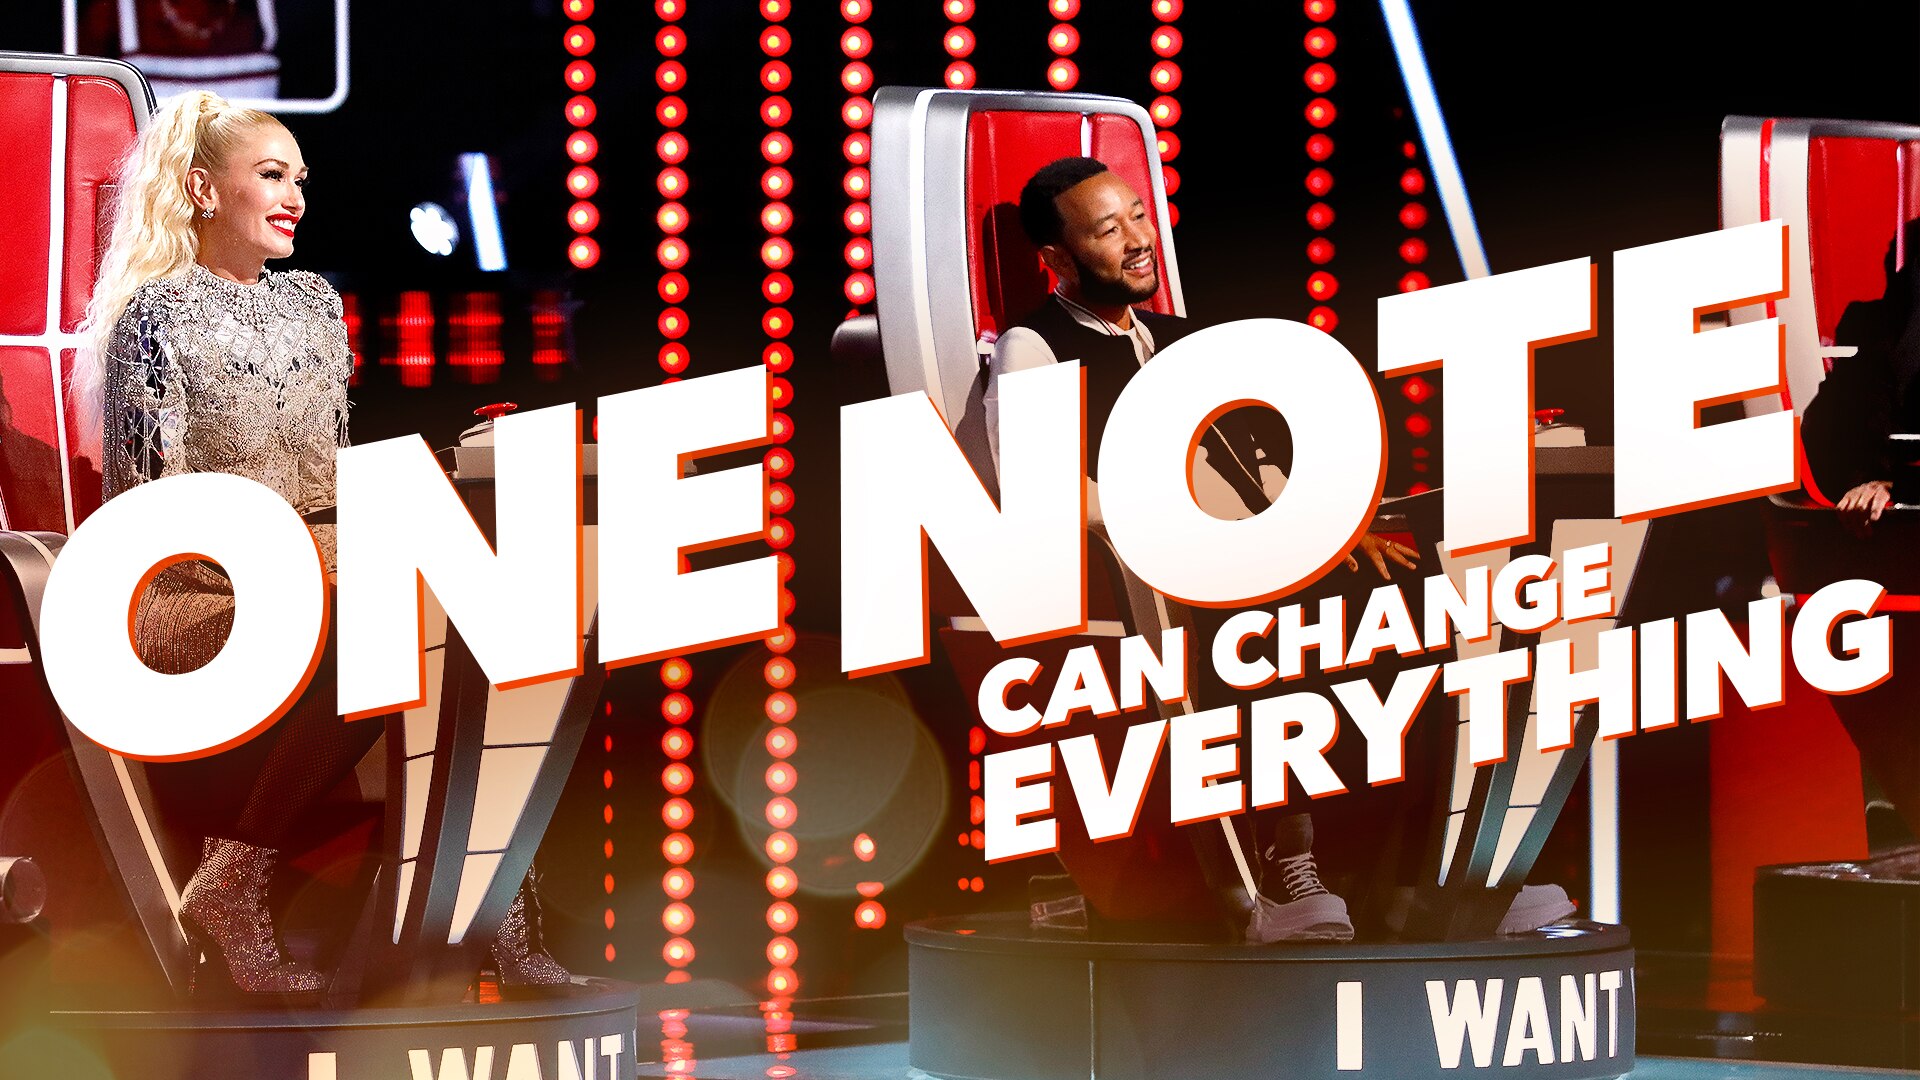 Watch The Voice Sneak Peek: The Voice Coaches Are Wowed by a New Group